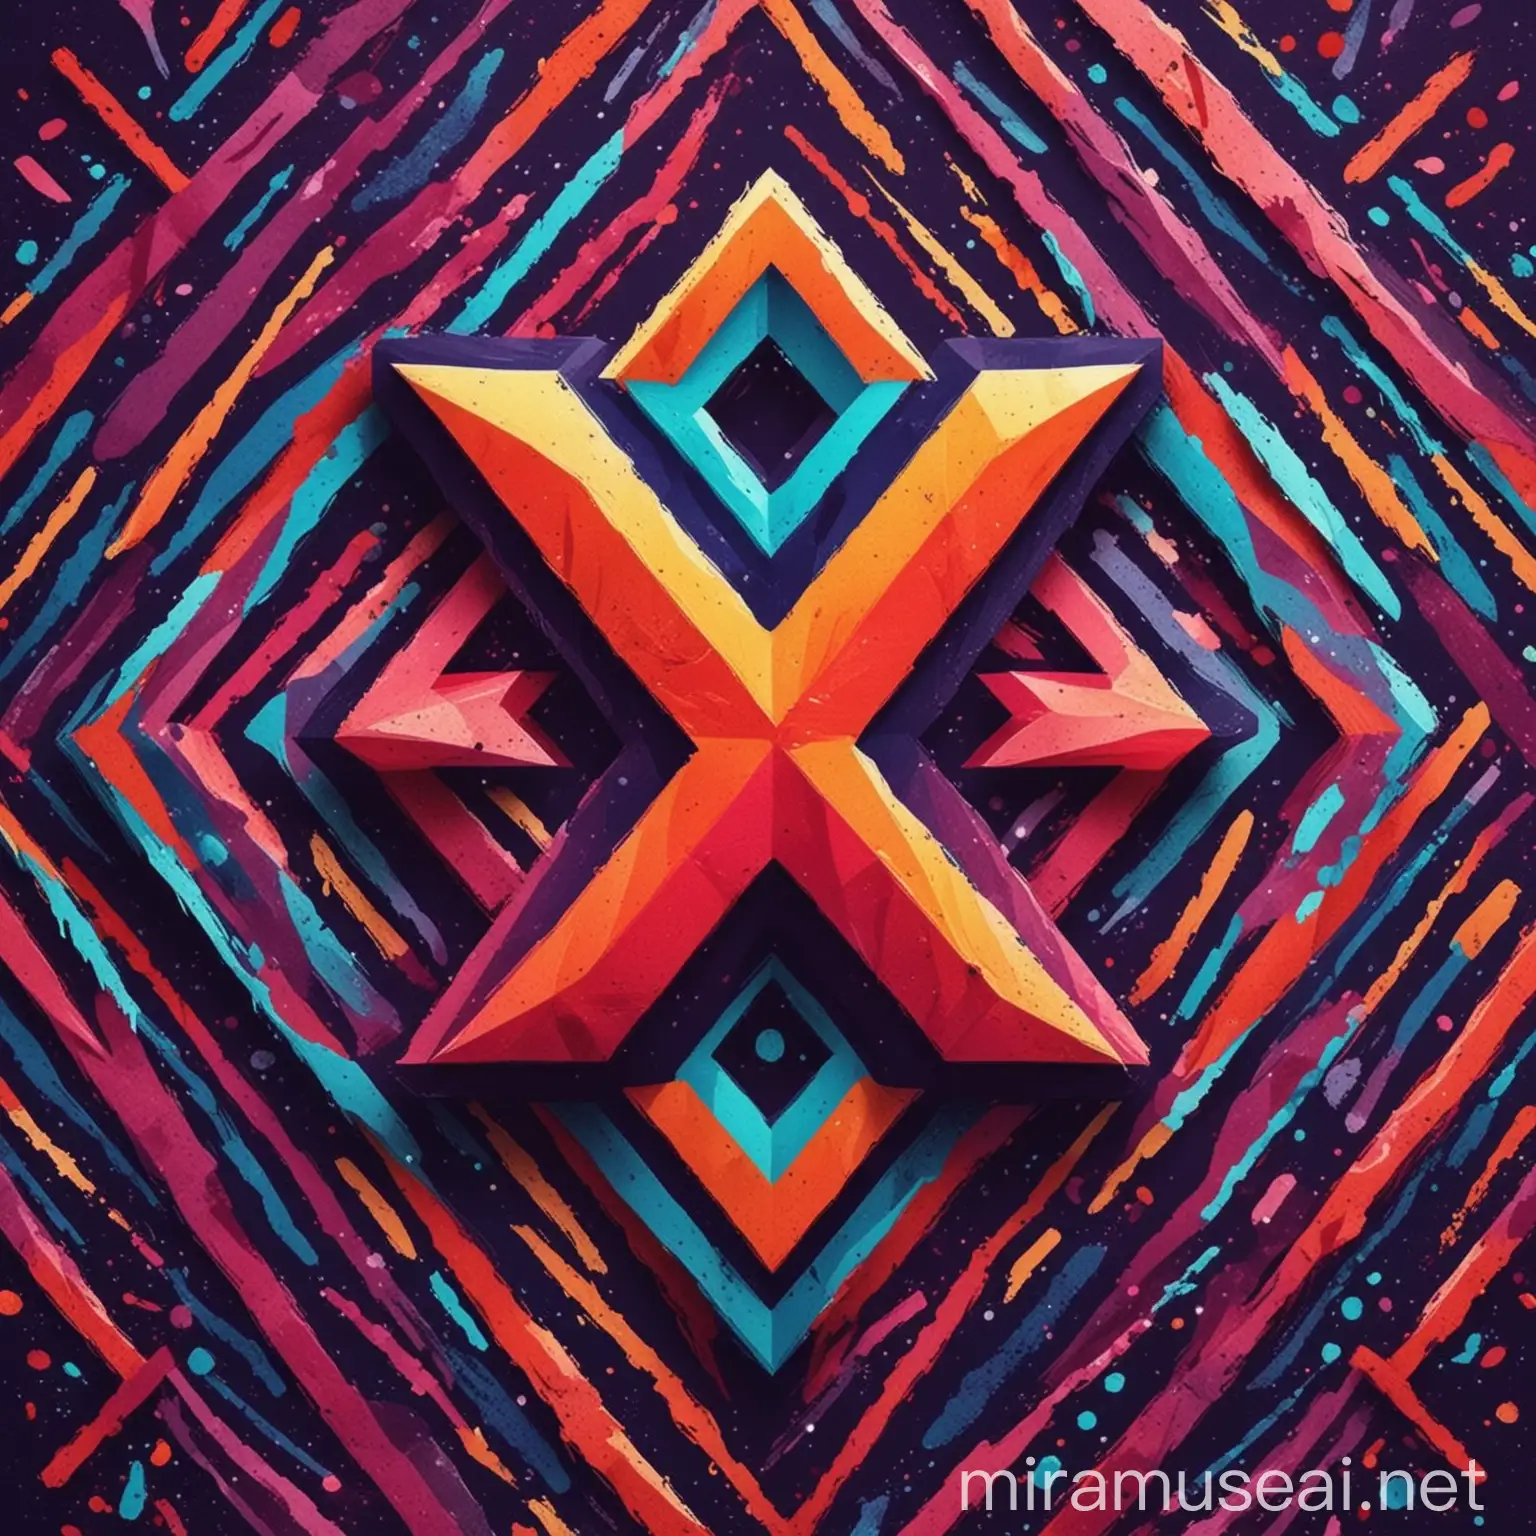 Design a vibrant, geometric shape or abstract pattern with bold lines and bright colors, incorporating the letter 'X' or a stylized element that represents the X app's brand and theme